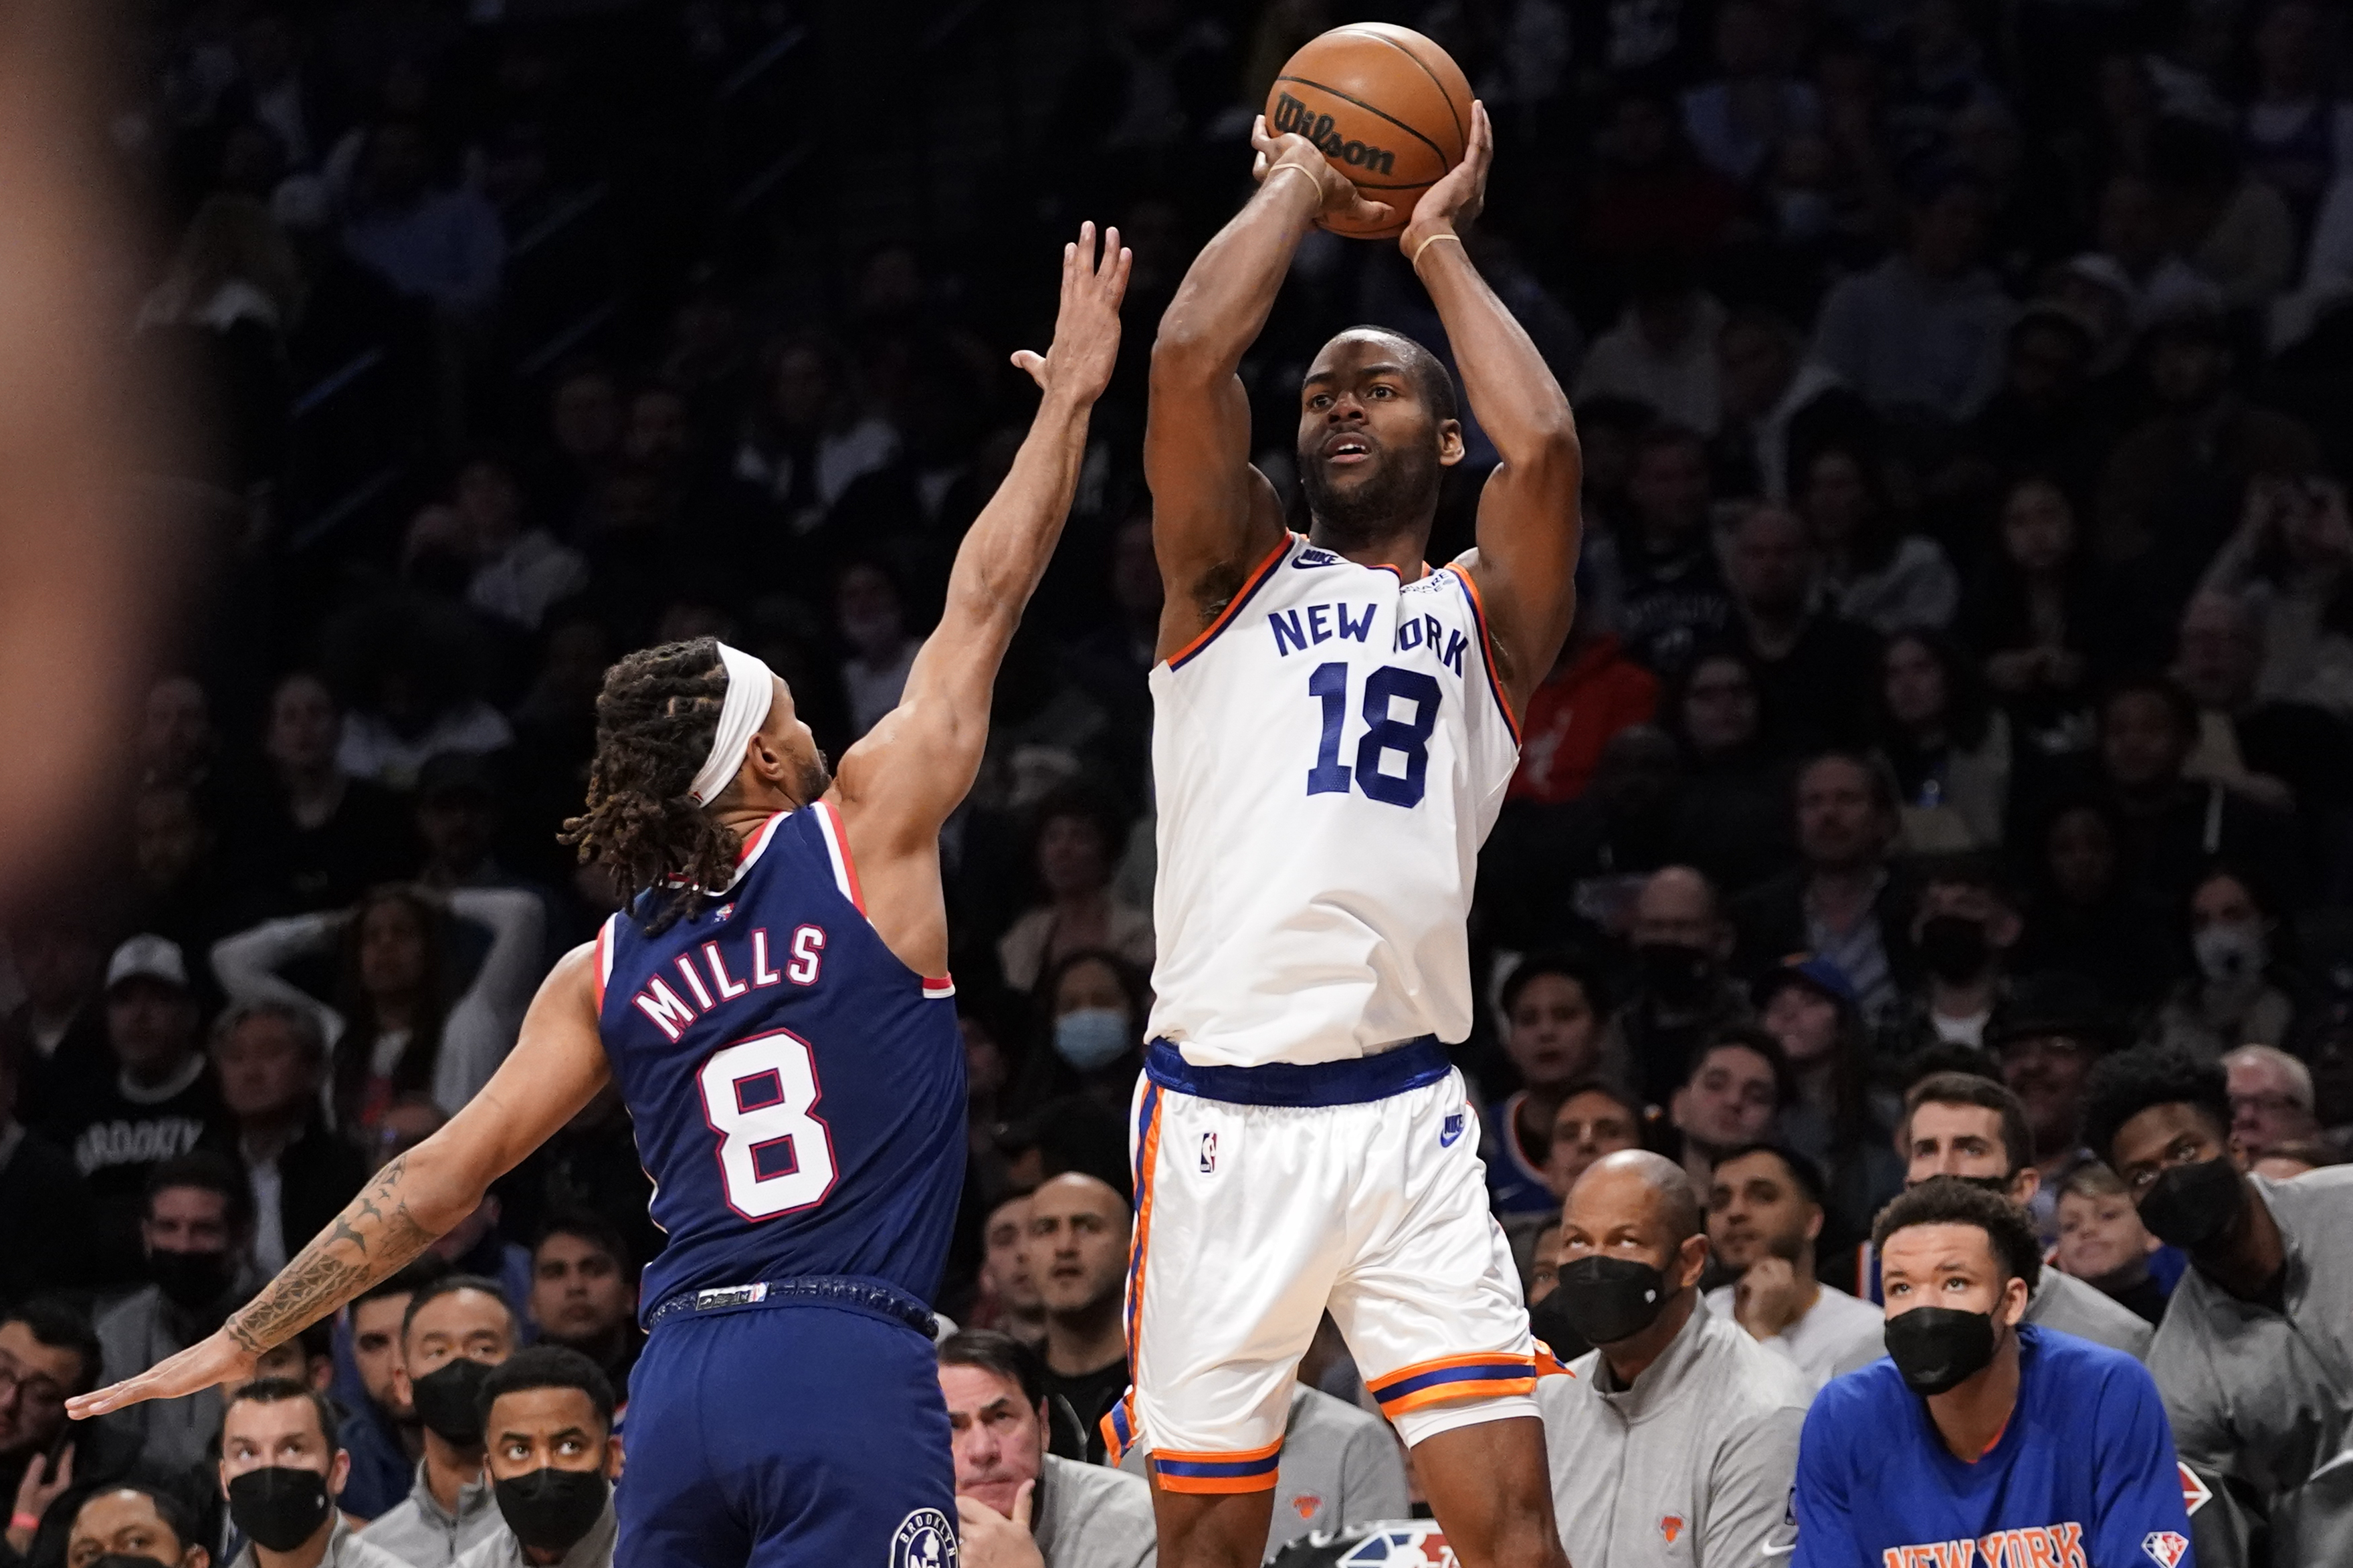 Knicks guard Alec Burks shoots a 3-point basket over Nets guard Patty Mills during the first half of a game, Tuesday, Nov. 30, 2021.